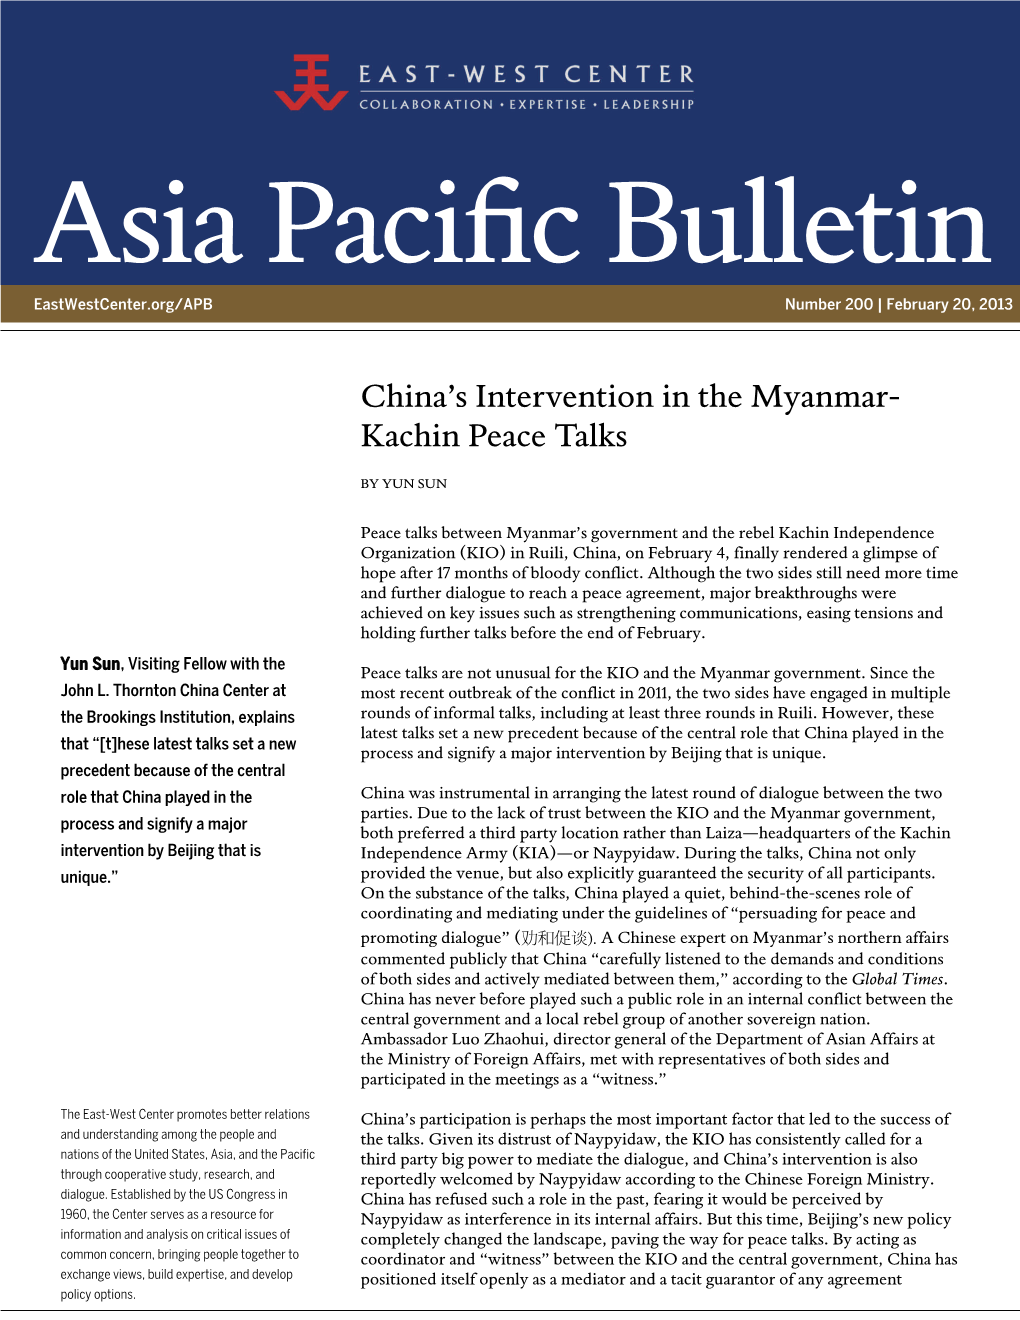 China's Intervention in the Myanmar-Kachin Peace Talks